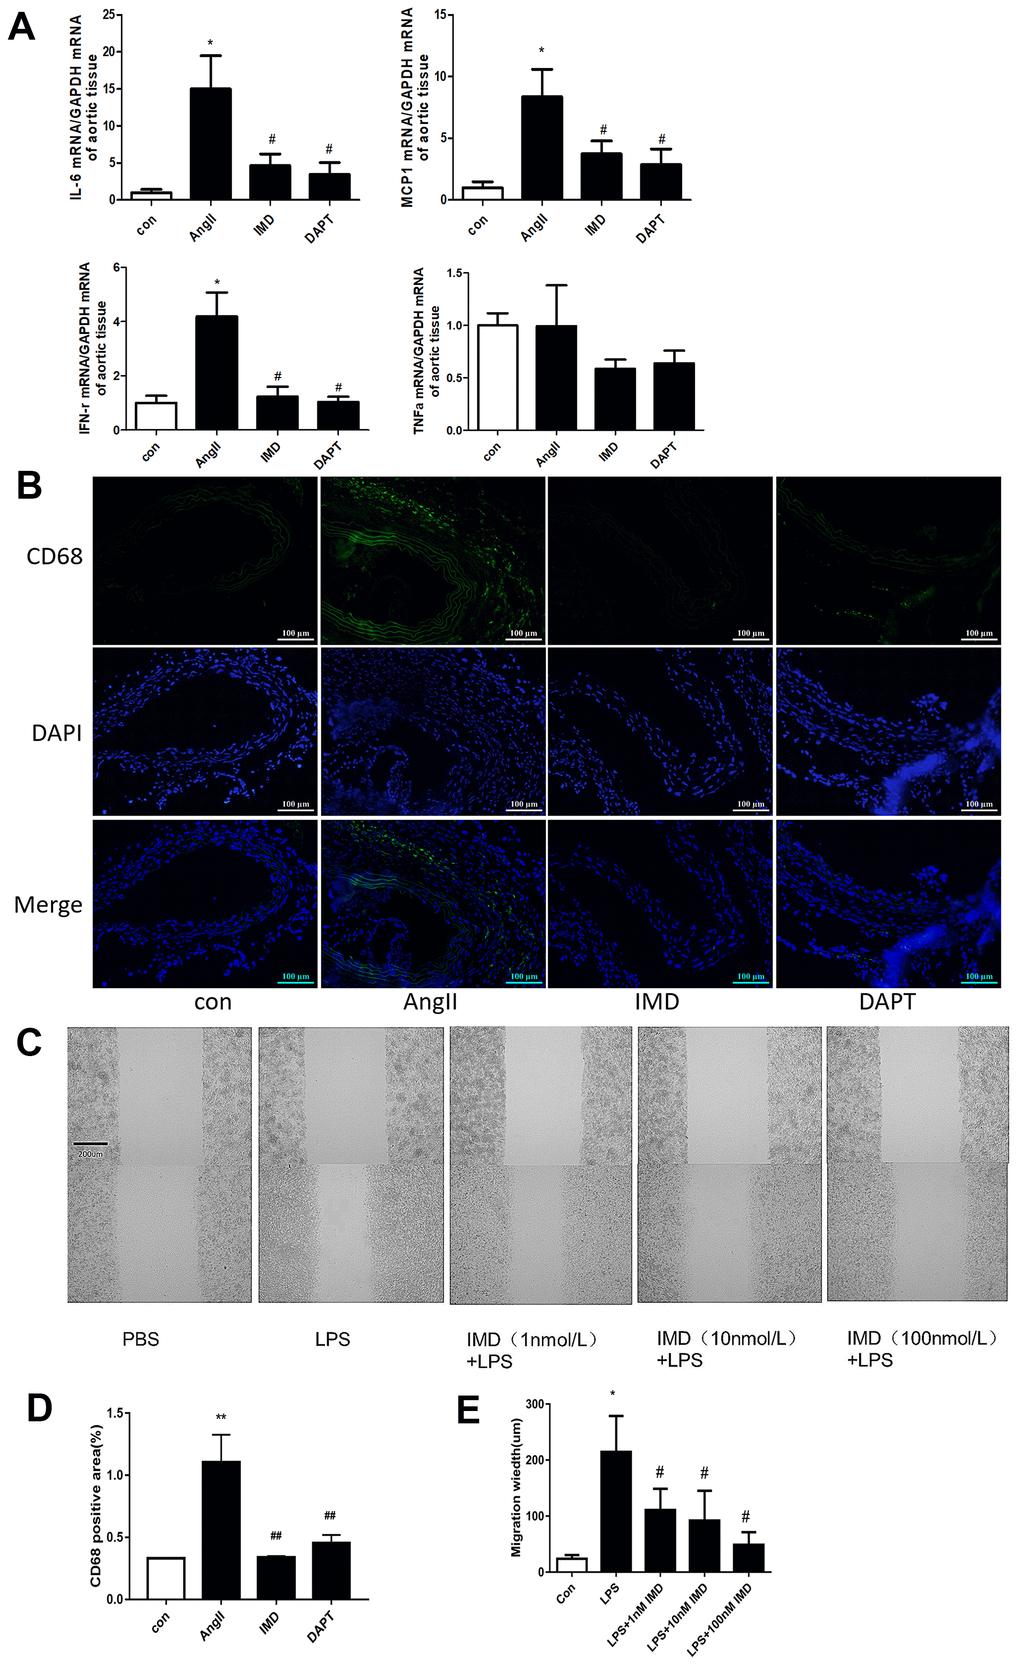 IMD inhibited macrophage-mediated inflammation via Notch1 signaling. (A) Quantitative real-time PCR of mRNA levels of IL-6, MCP-1, IFN-γ and TNF-α in aortas of Control, AngII, AngII+IMD and AngII+DAPT mice. (B) Representative immunofluorescence analysis of the protein expression of CD68 (green) and DAPI (blue) in aortas of mice. Scale bar, 100 μm. (C) Scratch-wound test to detect the transfer ability of mouse peritoneal macrophages in vitro. PBS, control group; LPS, stimulated group (100 ng/mL, 12 h). IMD was pretreated with a concentration gradient (1, 10, 100 nmol/L, 1 h). Cell migration distance was observed at 12 h after scratch wounding. Scale bar, 200 μm. n=3. (D) Quantification of (B). n=3, Data are mean ± SD. **P##PE) Quantification of scratch-wound test. n=3, Data are mean ± SD. *P#P